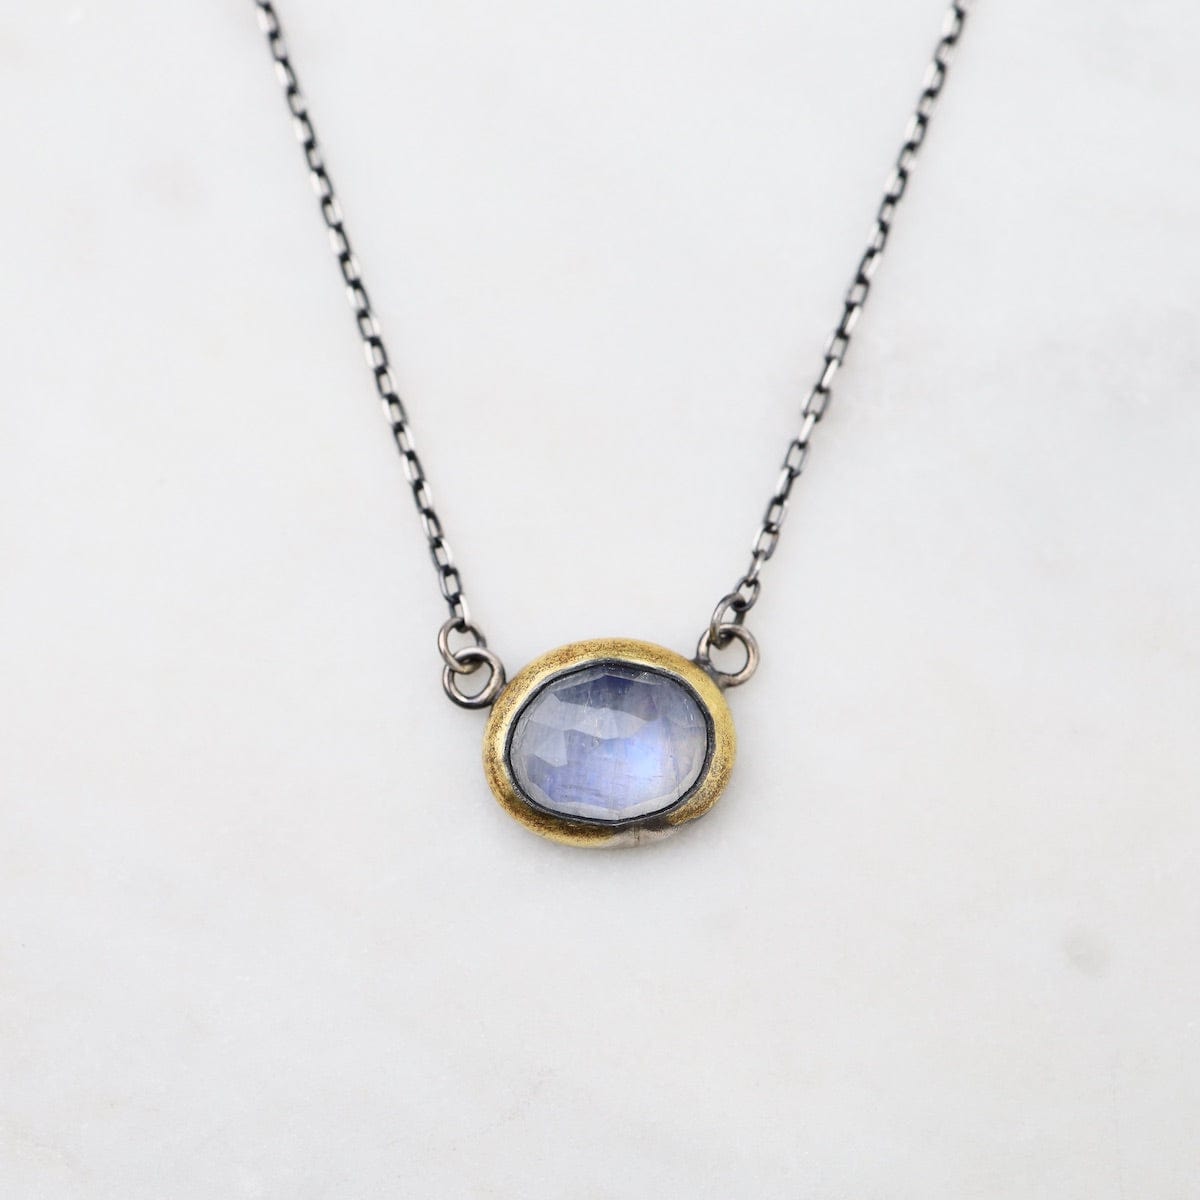 NKL Petite Crescent Rim Necklace with Moonstone